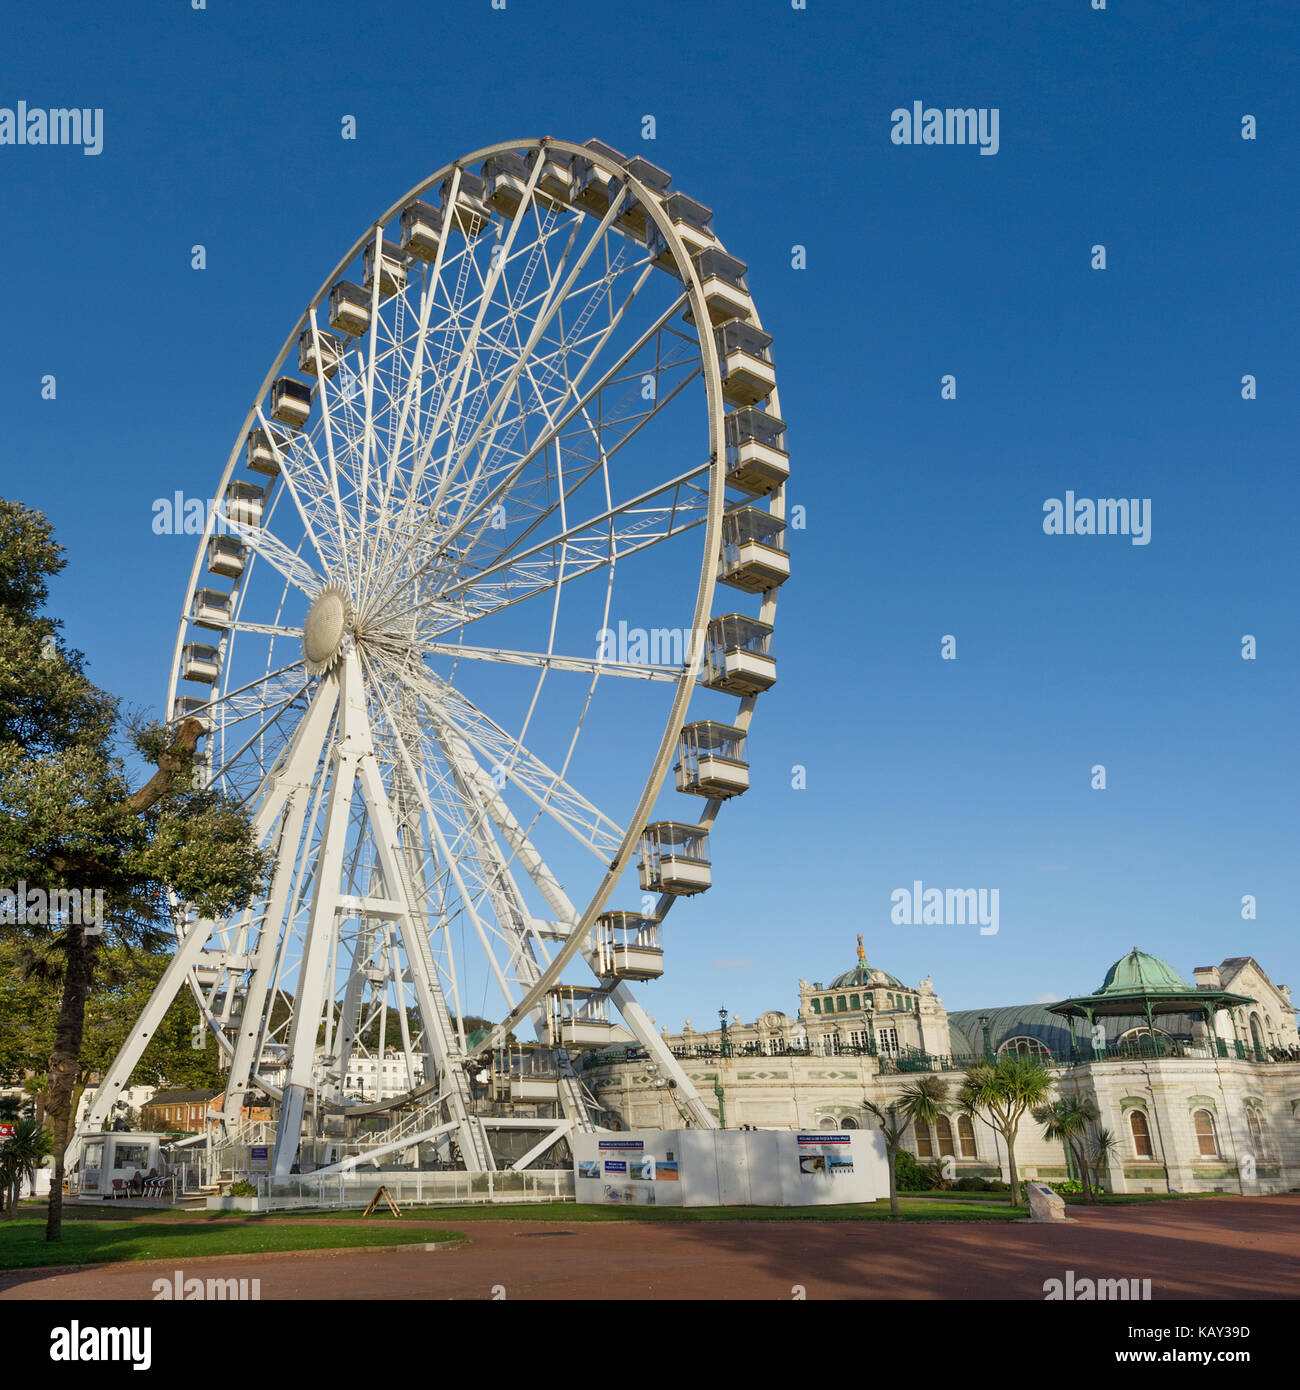 The Riviera Wheel in Princess Gardens Torquay, Devon, UK with the Victorian Pavilion in the background on a sunny summer's day with clear blue skies Stock Photo